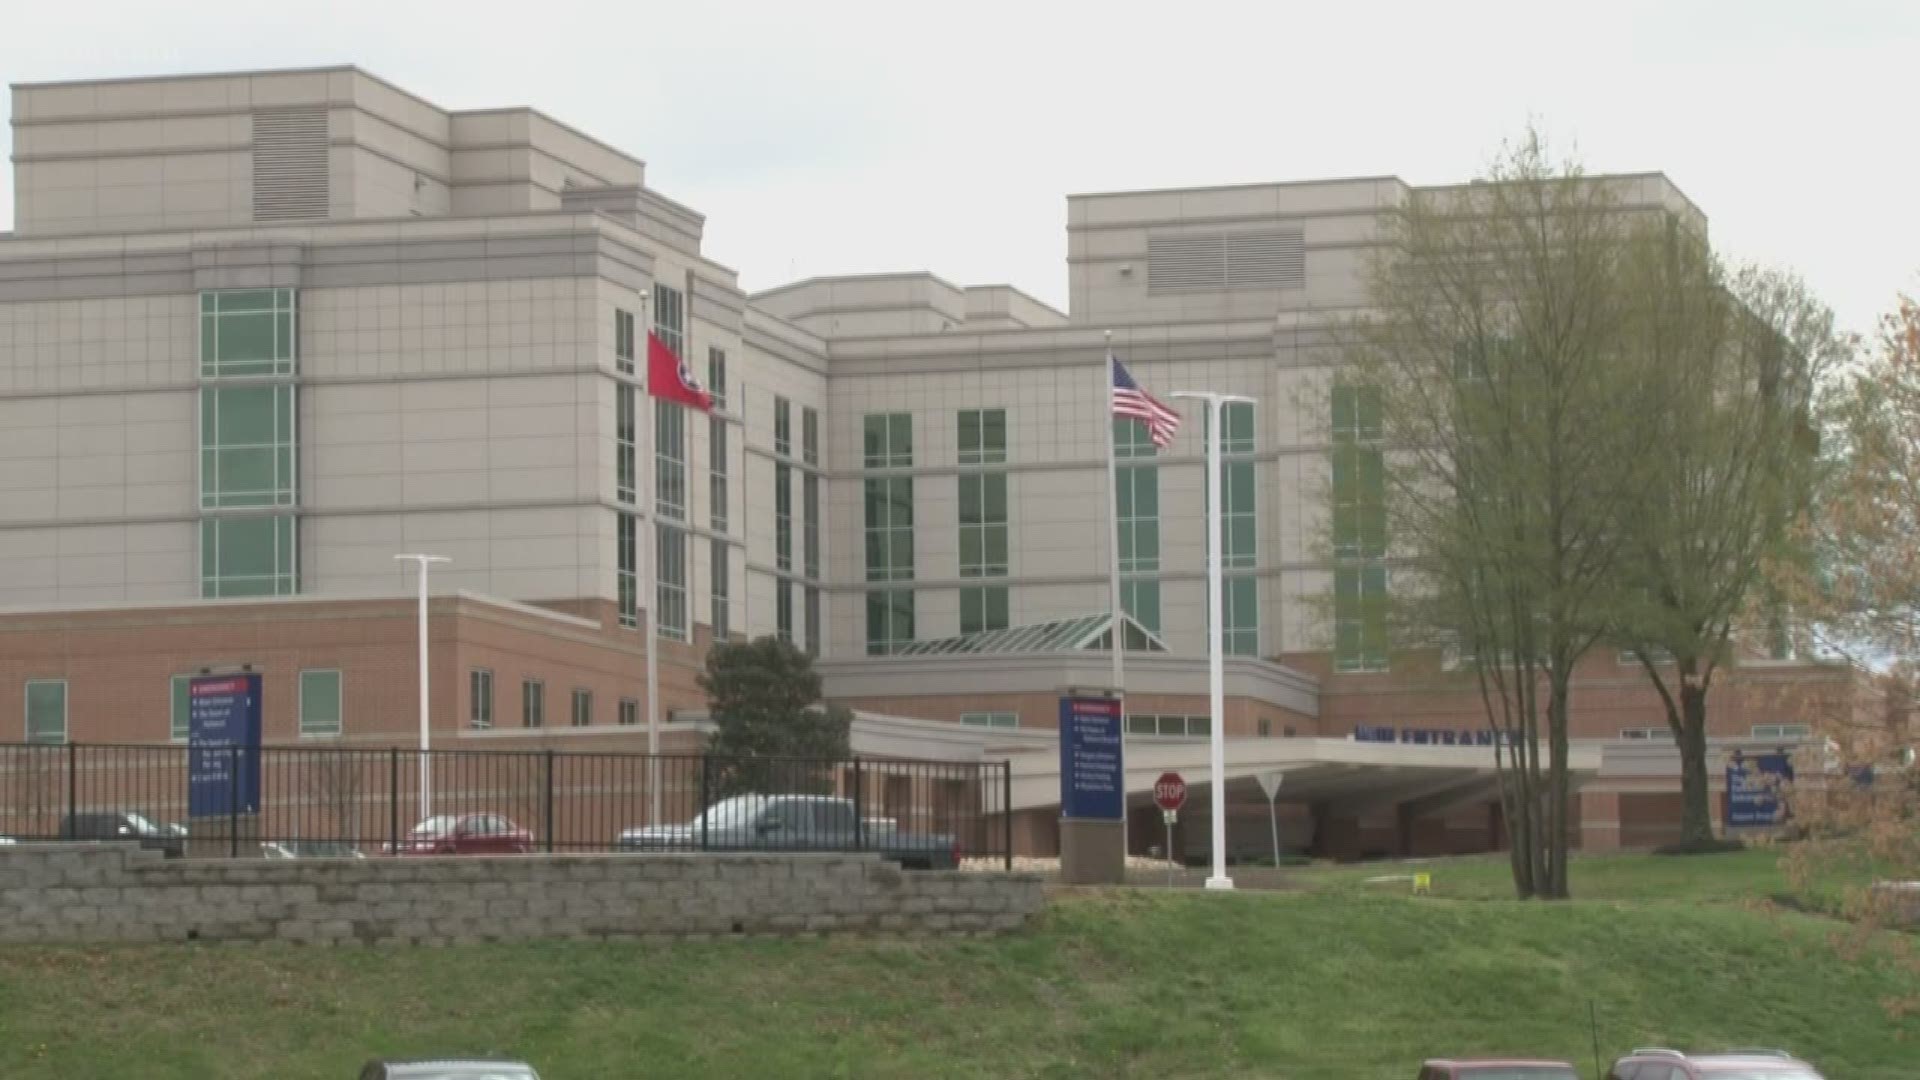 A critical care nurse at Parwest Medical Center said she was told to care for suspected COVID-19 patients without an n-95 respirator mask. So, she quit.